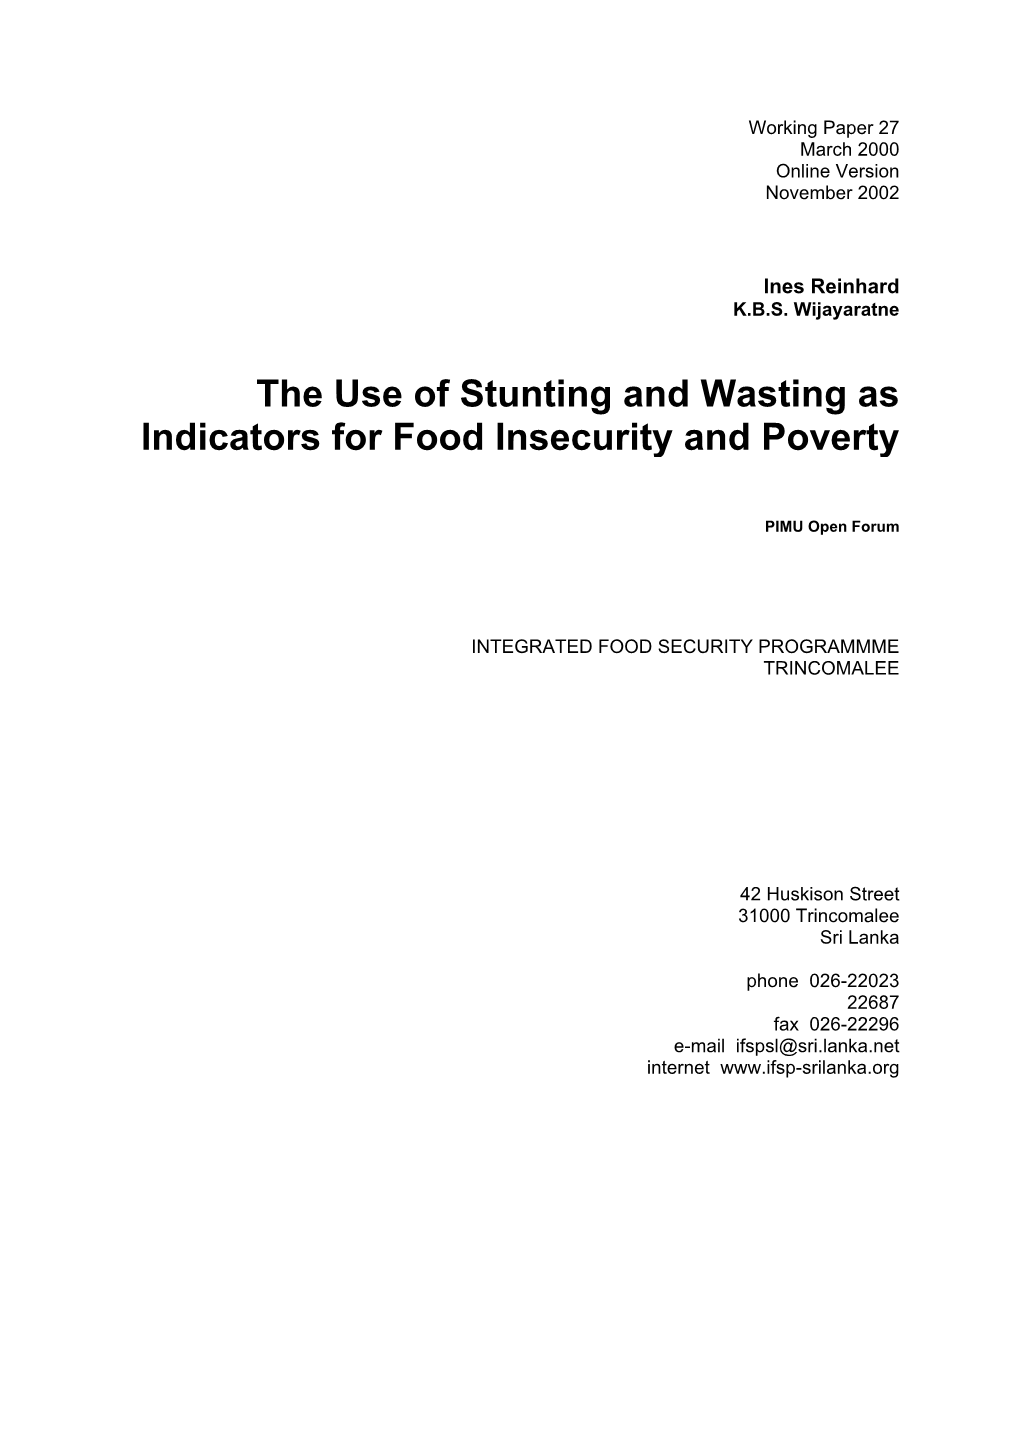 The Use of Stunting and Wasting As Indicators for Food Insecurity and Poverty